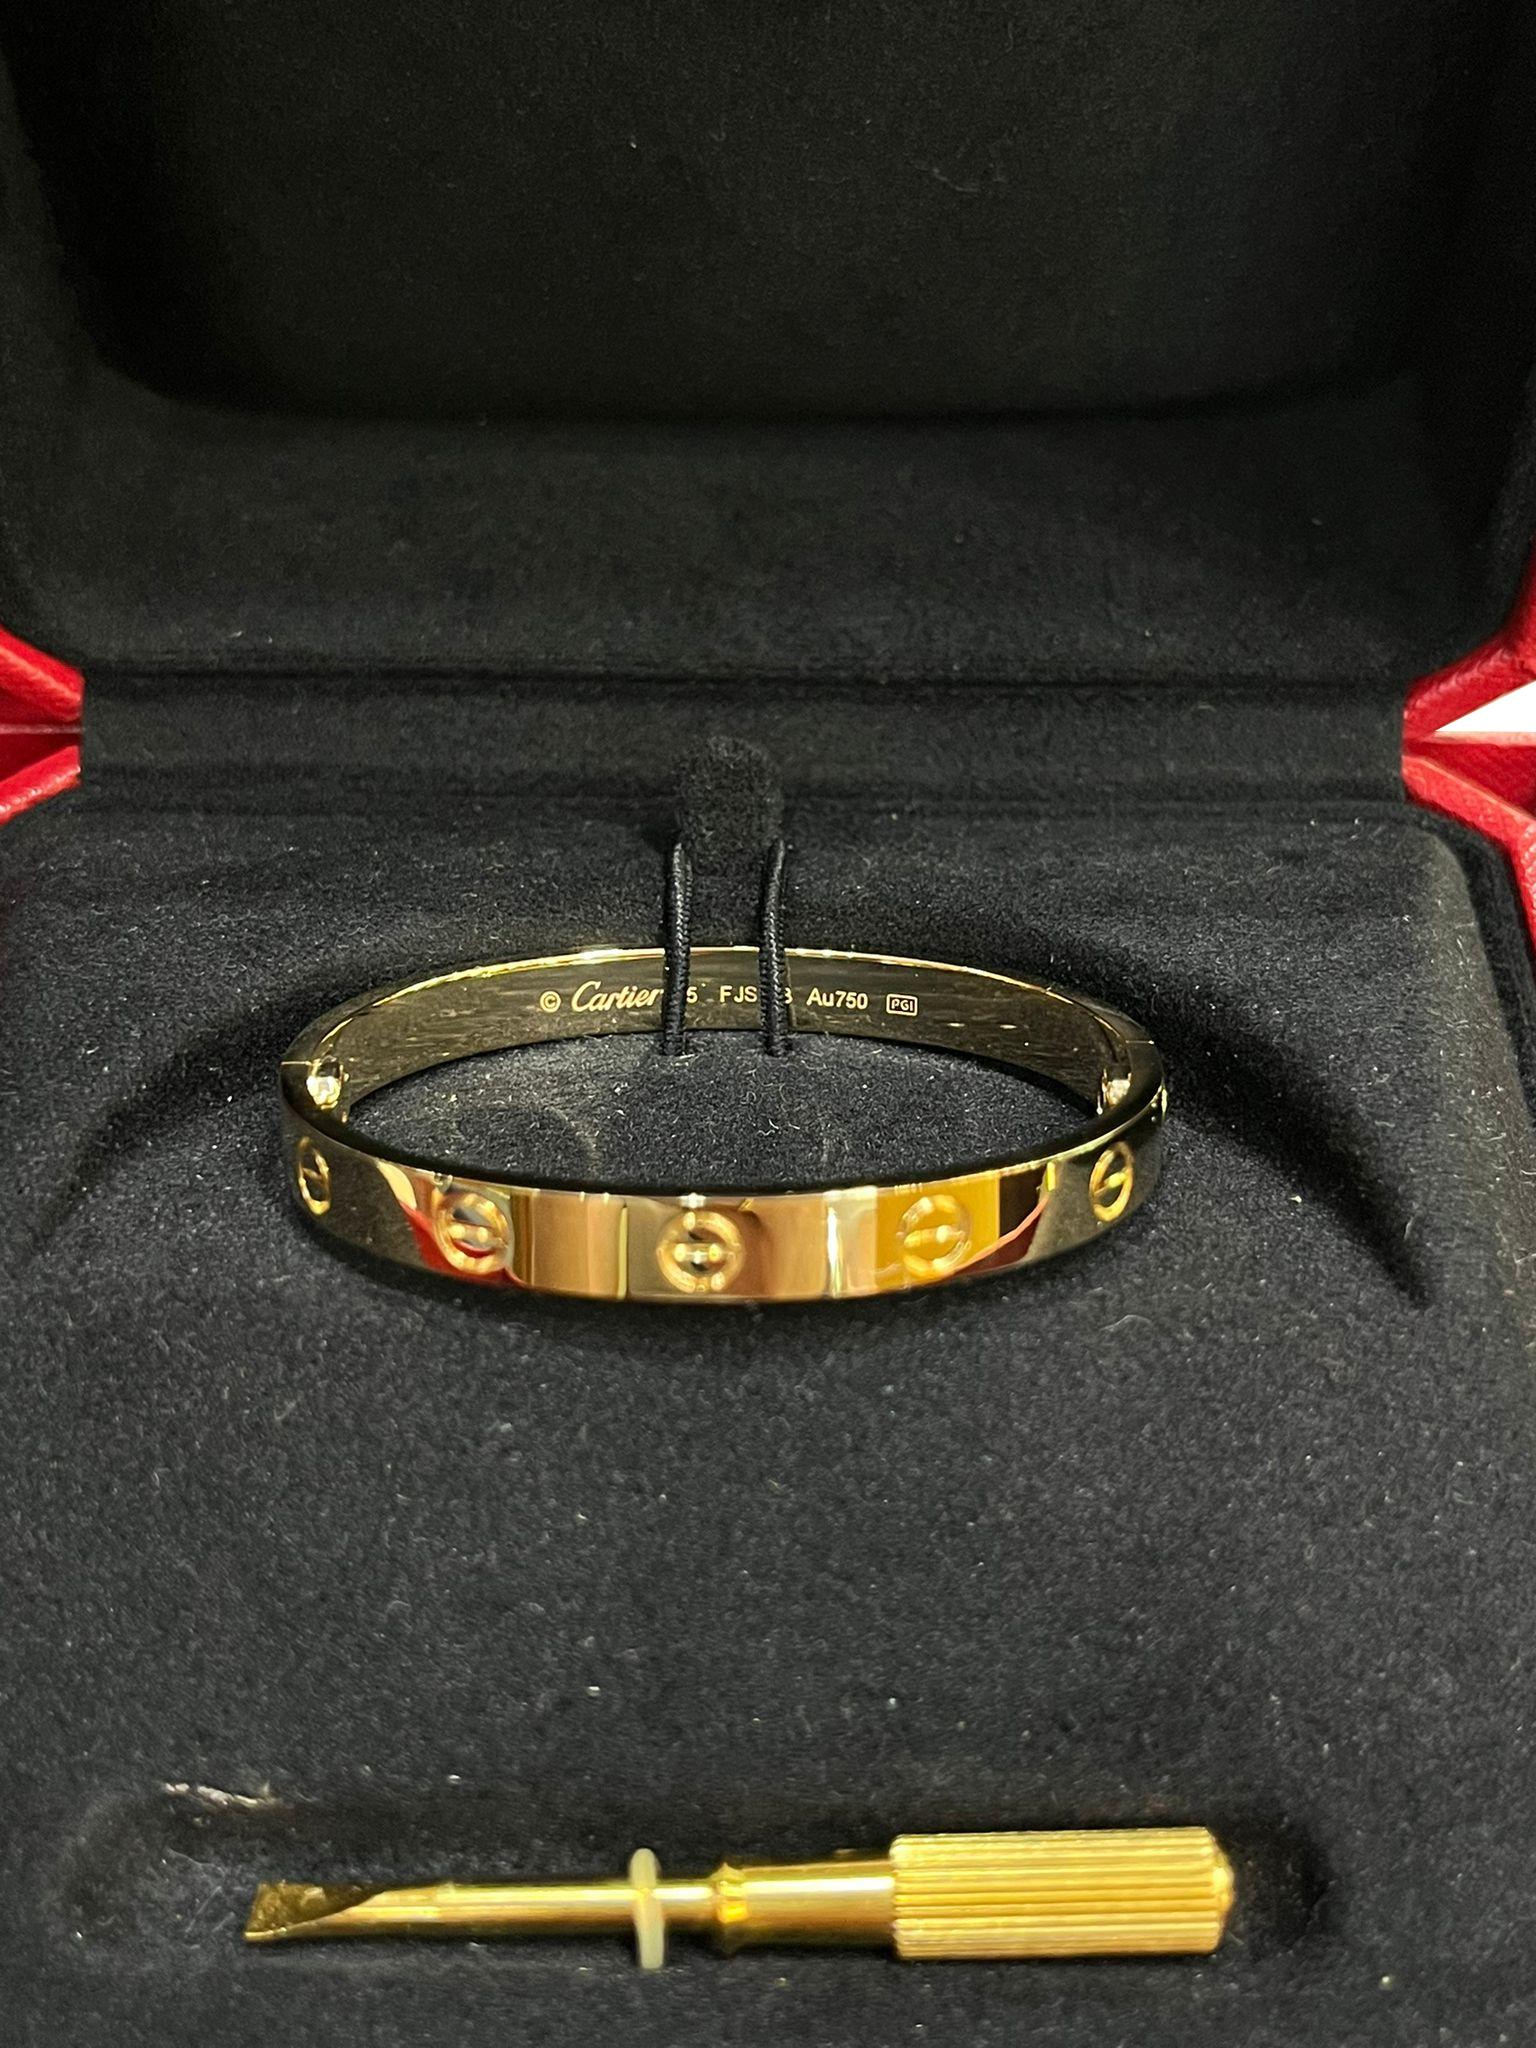 Cartier Love Bracelet 18K Yellow Gold Size 15 Brushed Finish with Screwdriver For Sale 7